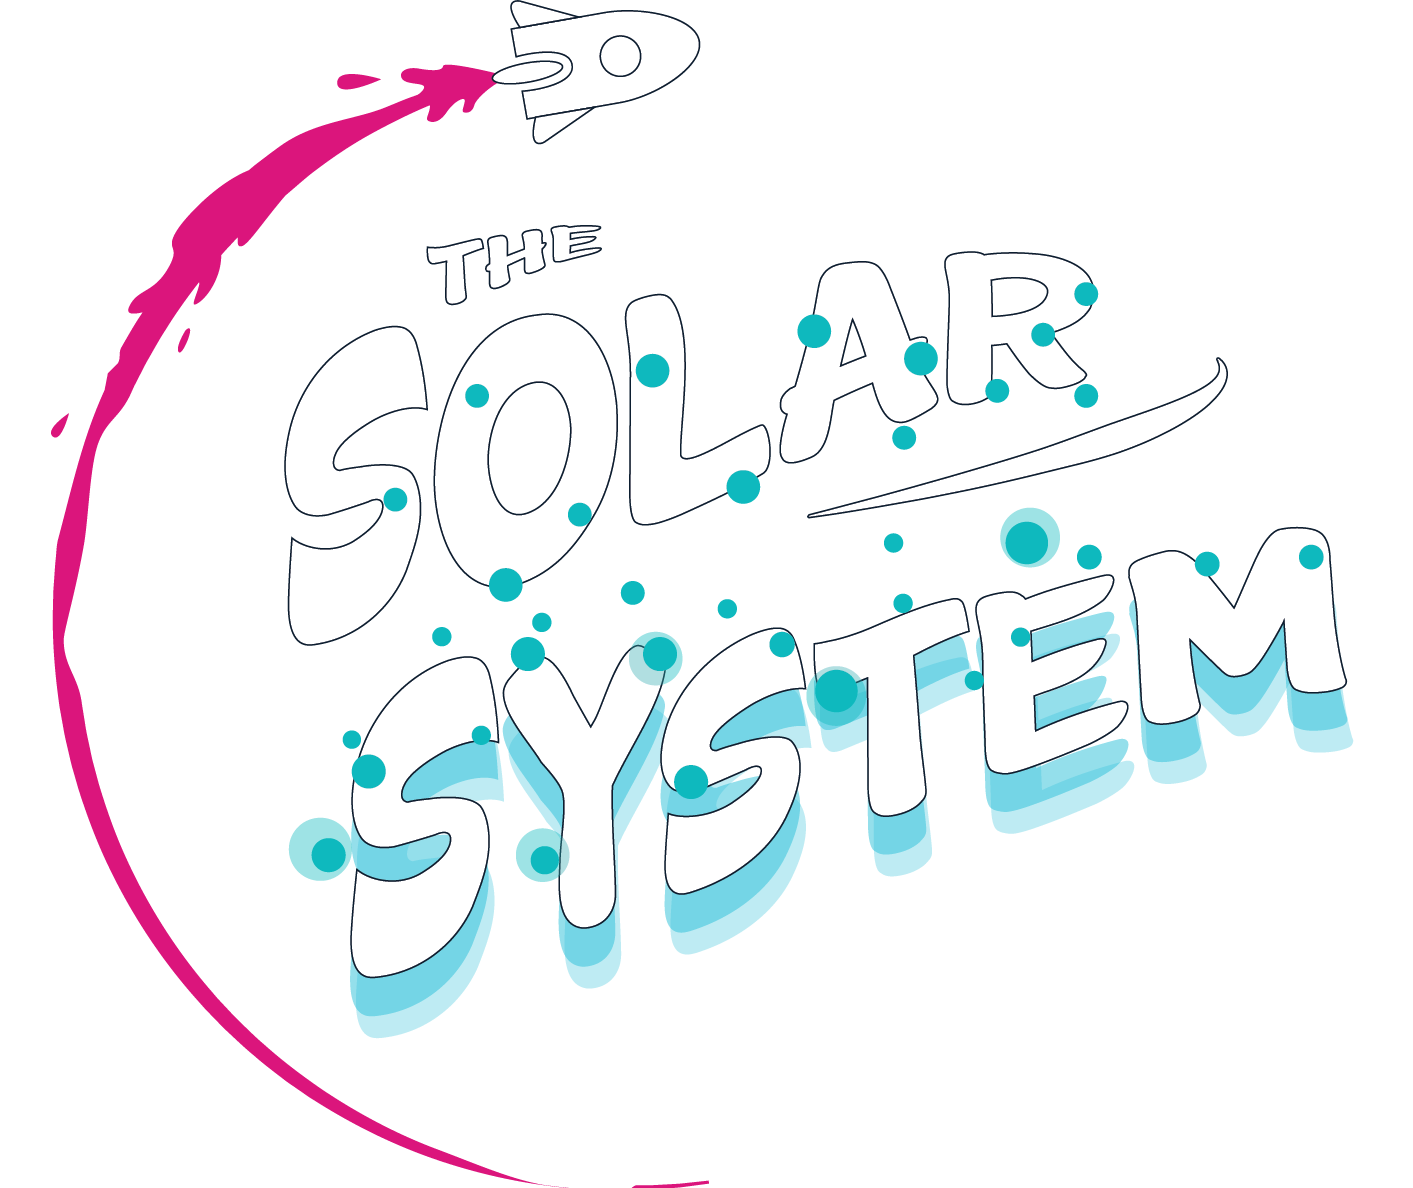 the solar system font